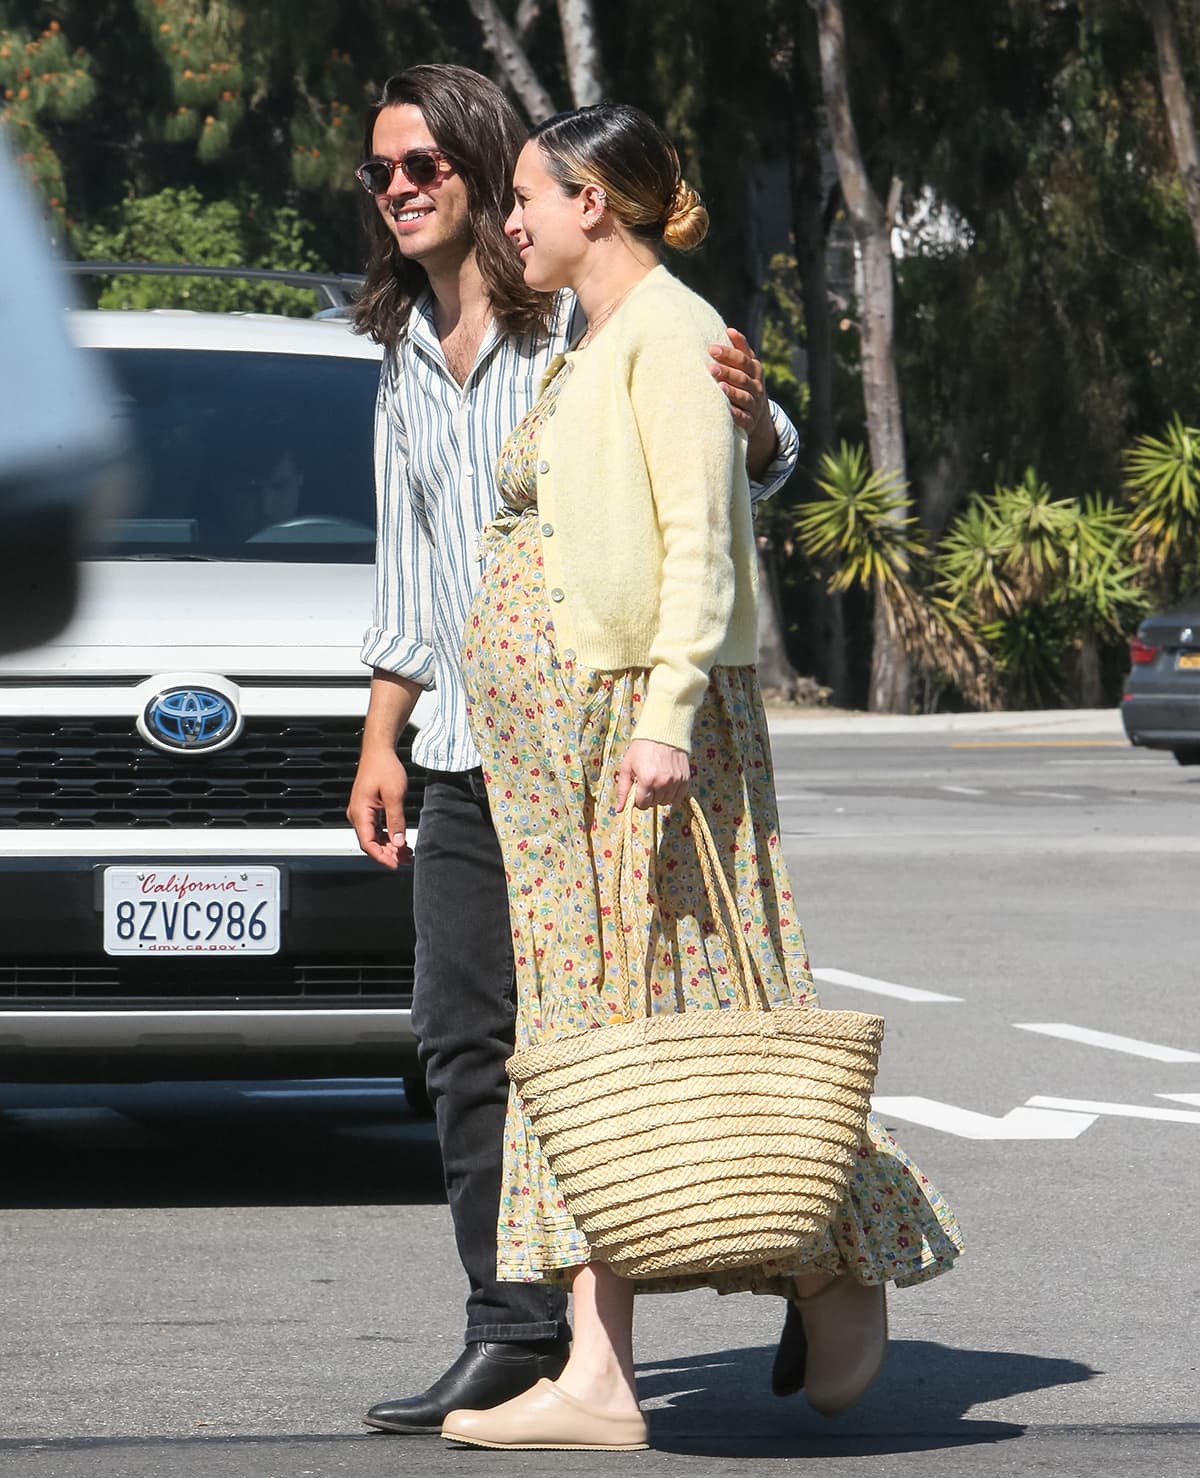 Rumer Willis showcases her growing baby bump in a yellow floral maternity maxi dress and a yellow cardigan